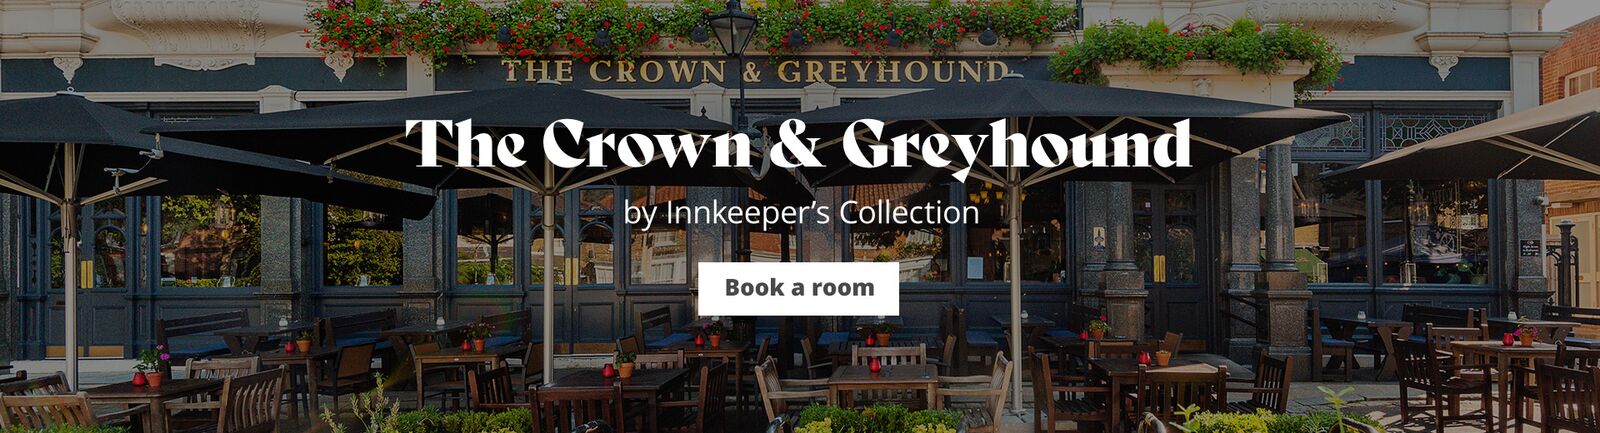 large-ikc-2023-the-crown-greyhound-hotel-dulwich-london-home-banner.jpg